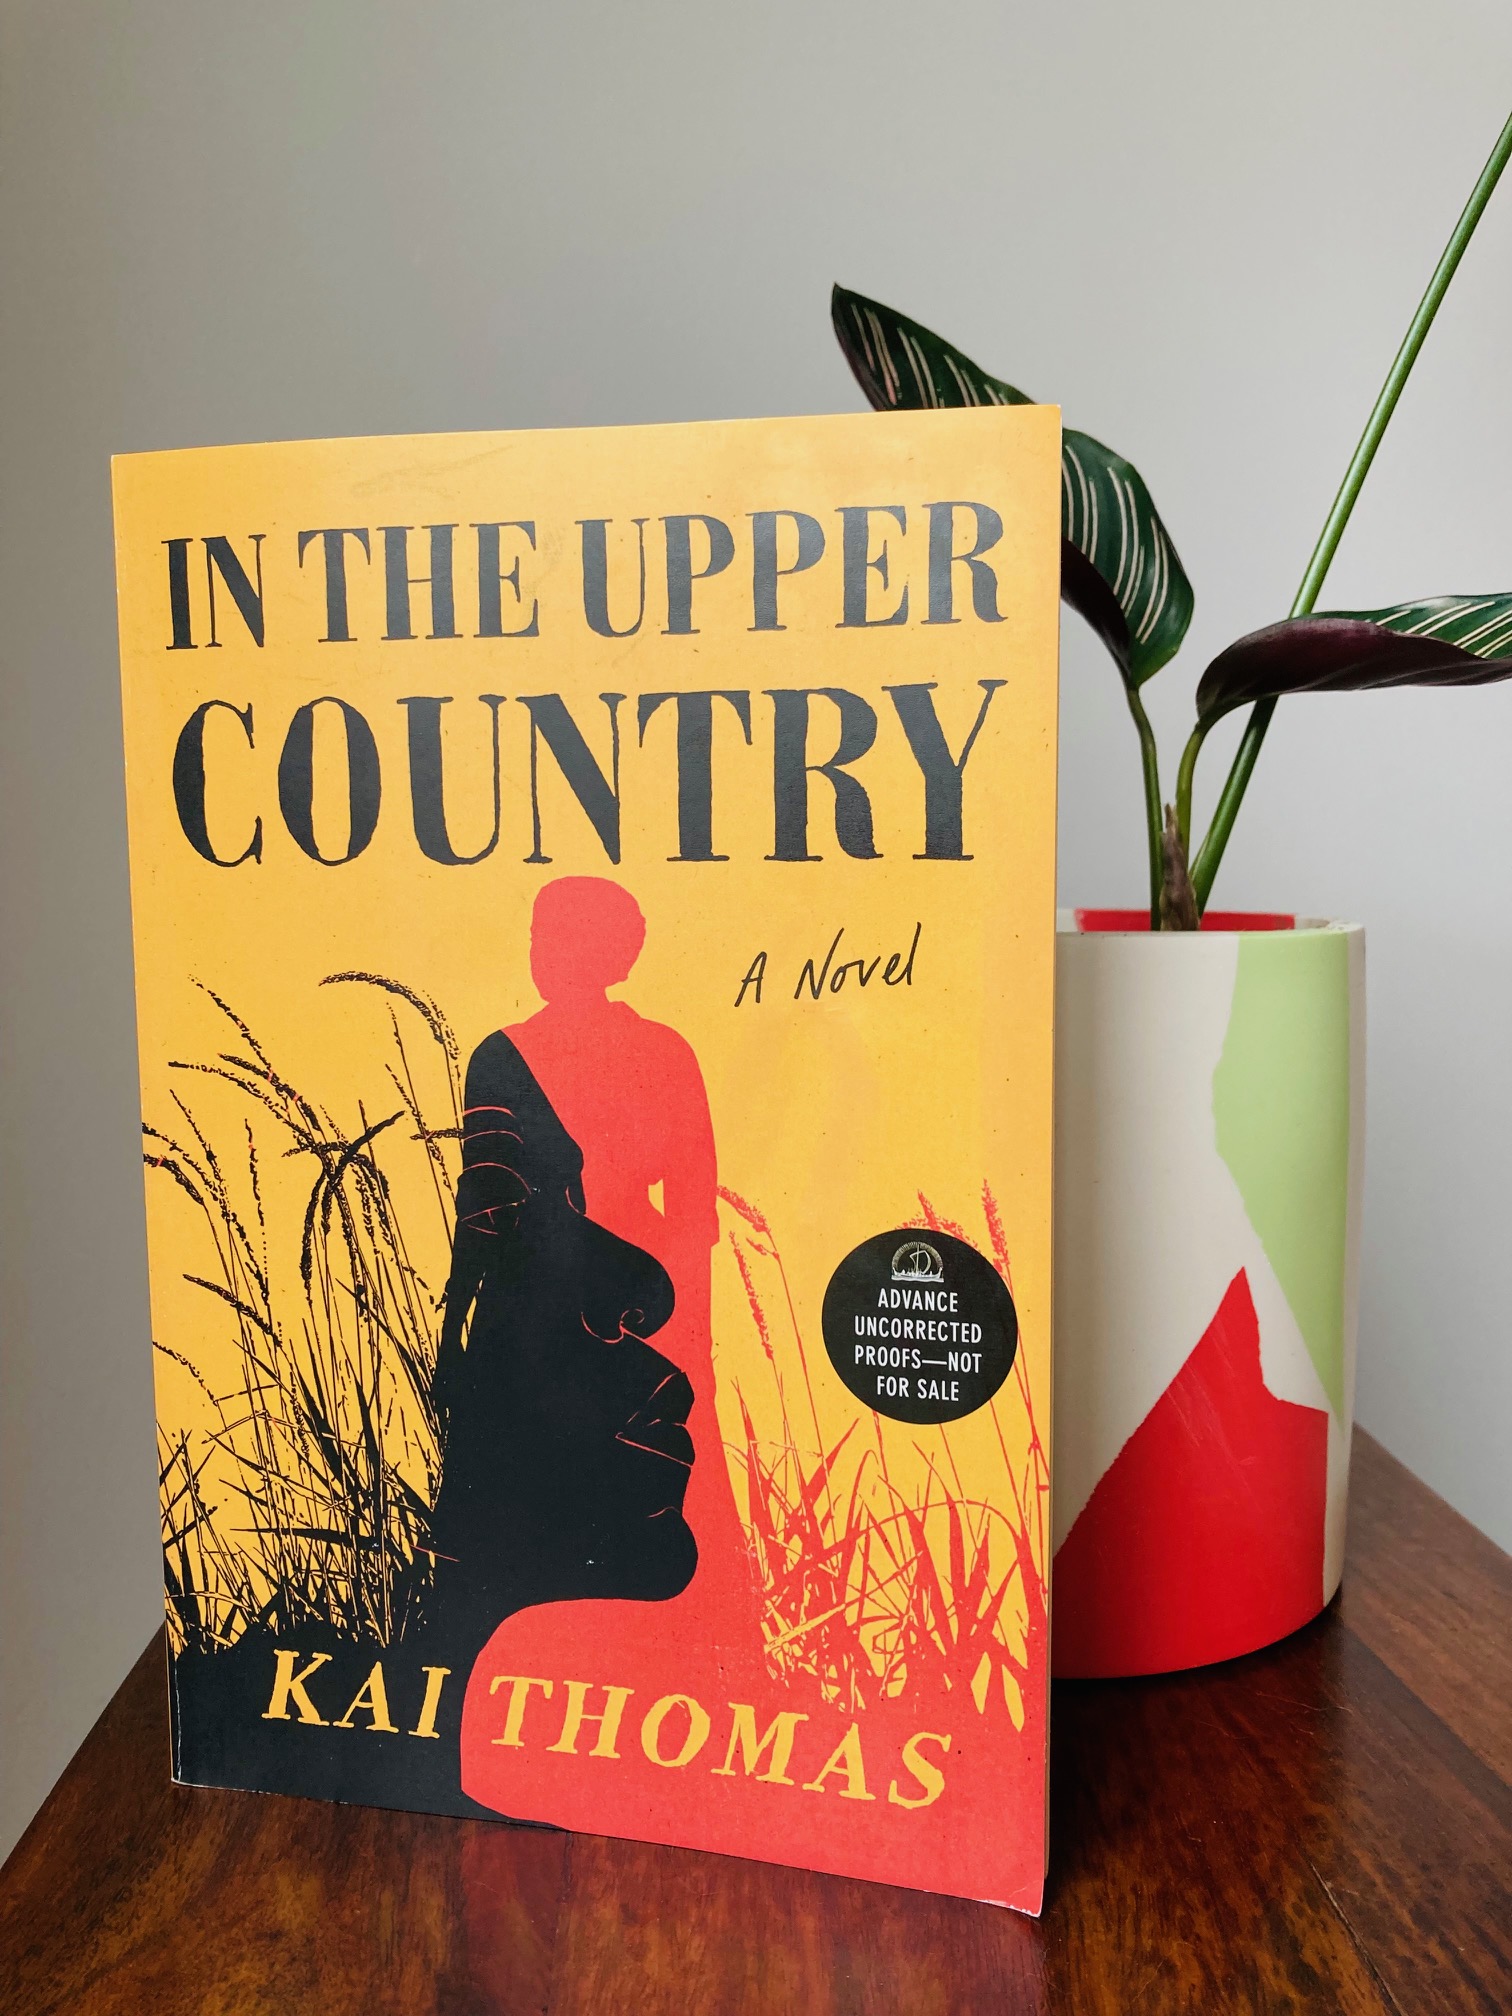 In the Upper Country by Kai Thomas book pictured beside a plant